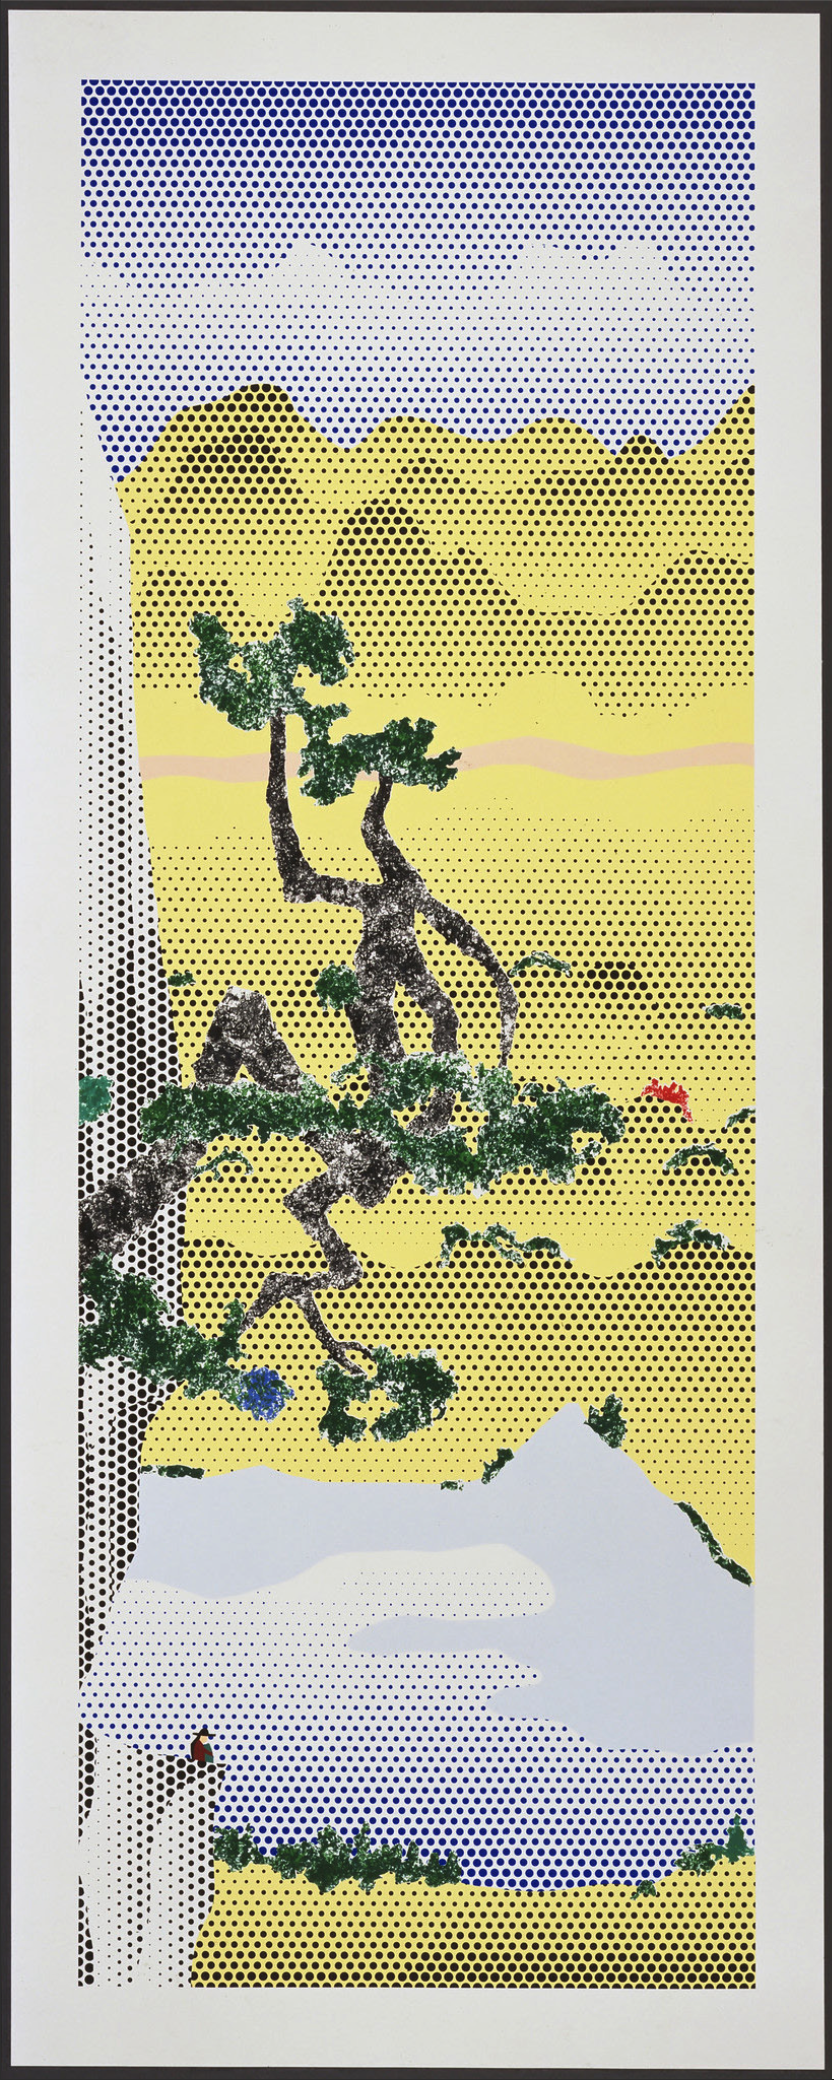 Roy Lichtenstein Landscape with Poet, 1966 Lithograph and screenprint Image Dimensions: 83 7/8 x 30 inches (213 x 76.2 cm) Paper Dimensions: 90 1/4 x 36 inches (229.2 x 91.4 cm) Edition of 60